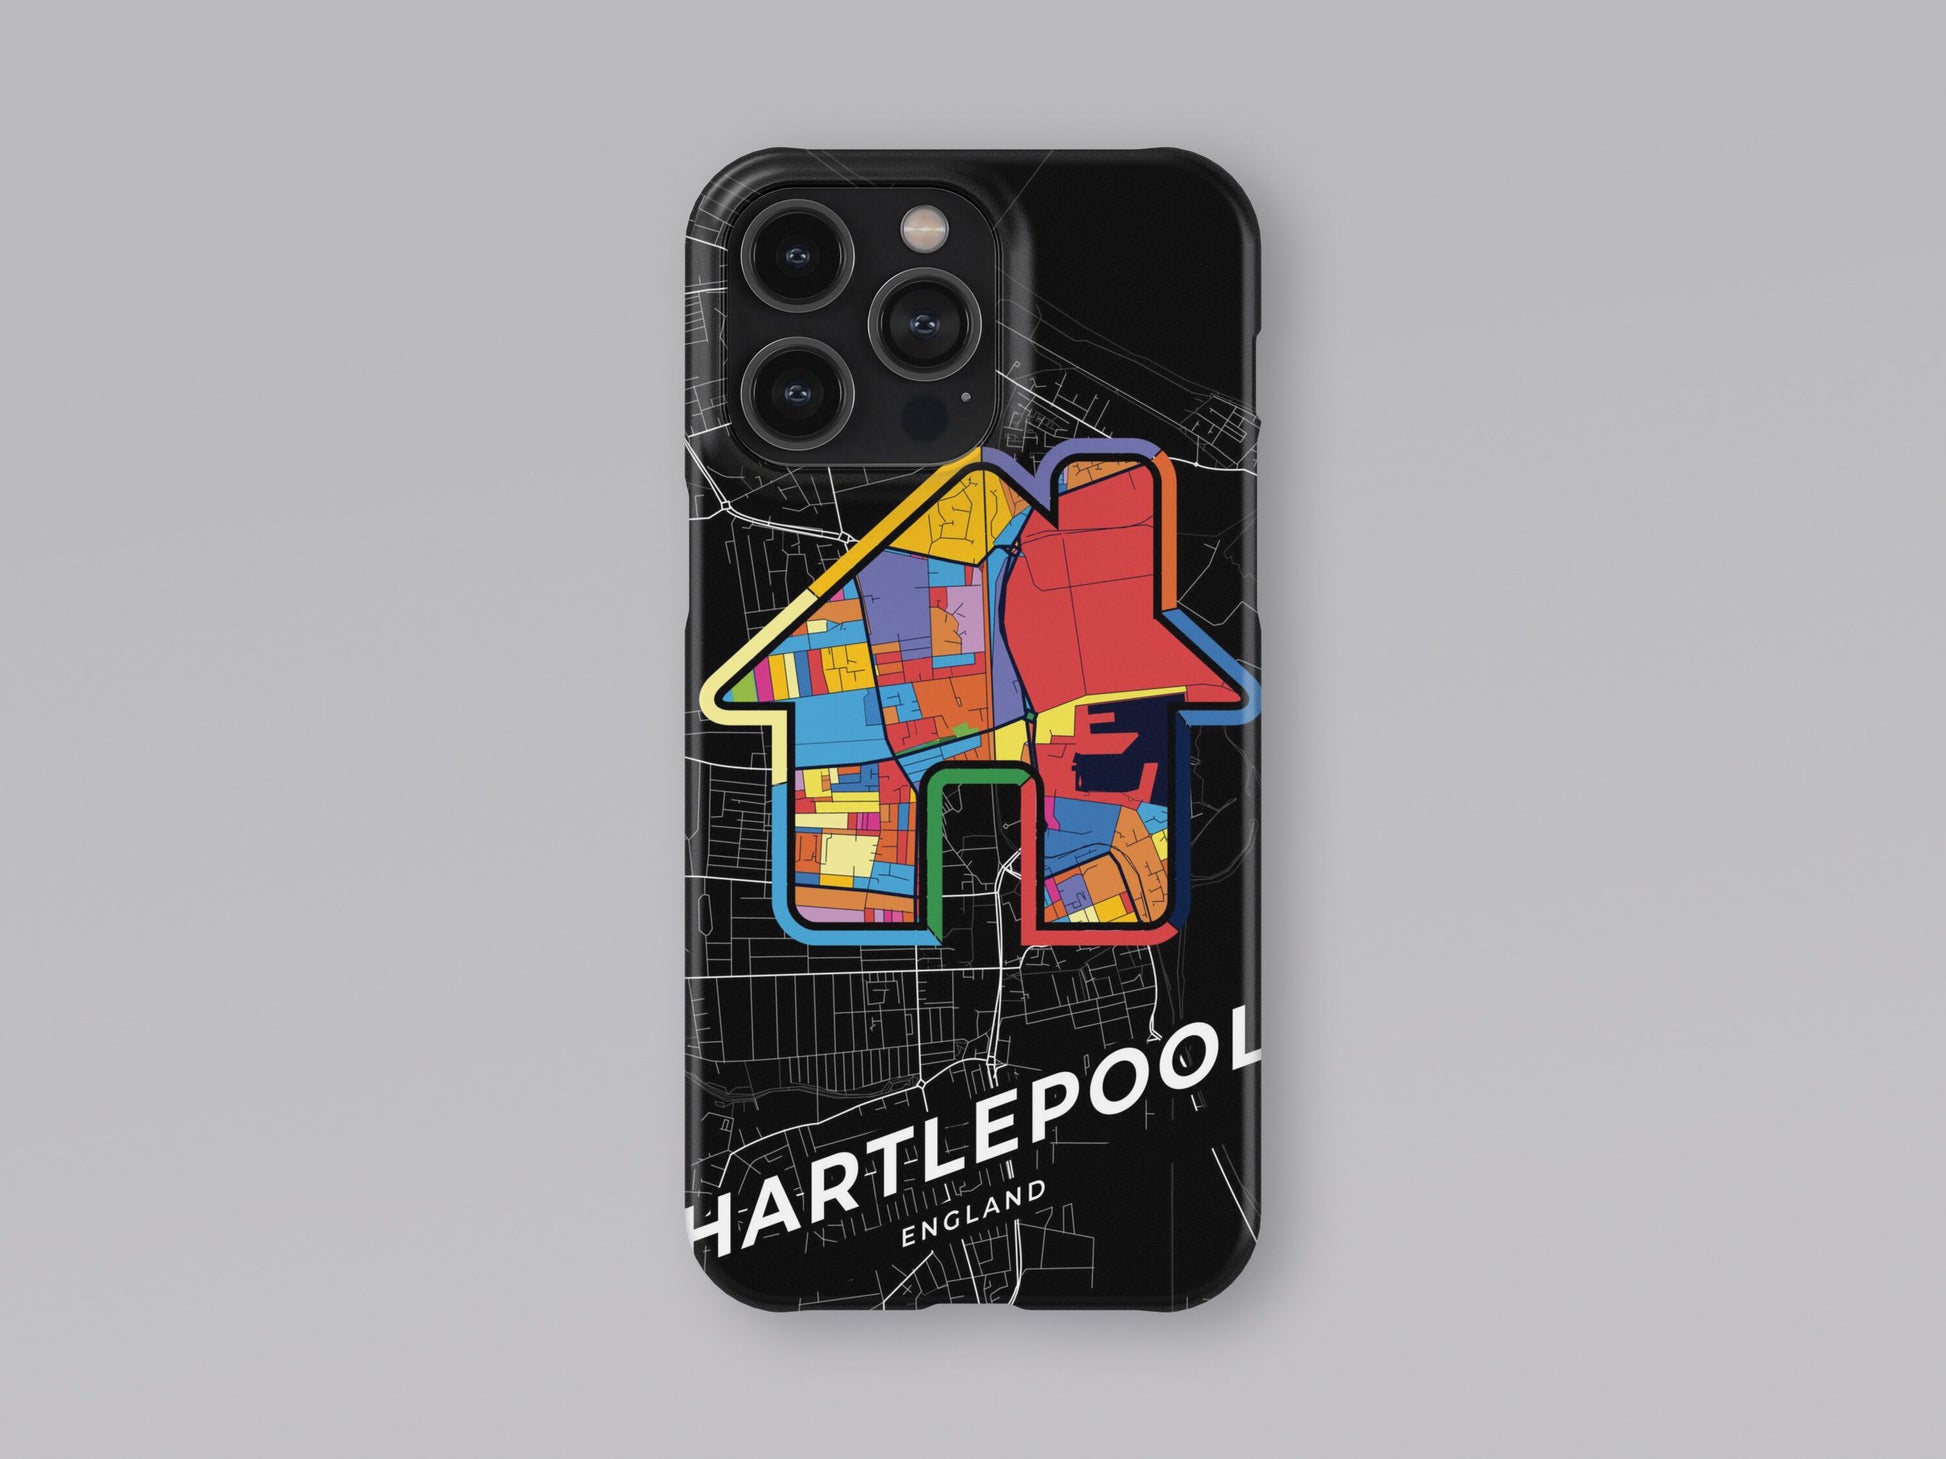 Hartlepool England slim phone case with colorful icon. Birthday, wedding or housewarming gift. Couple match cases. 3